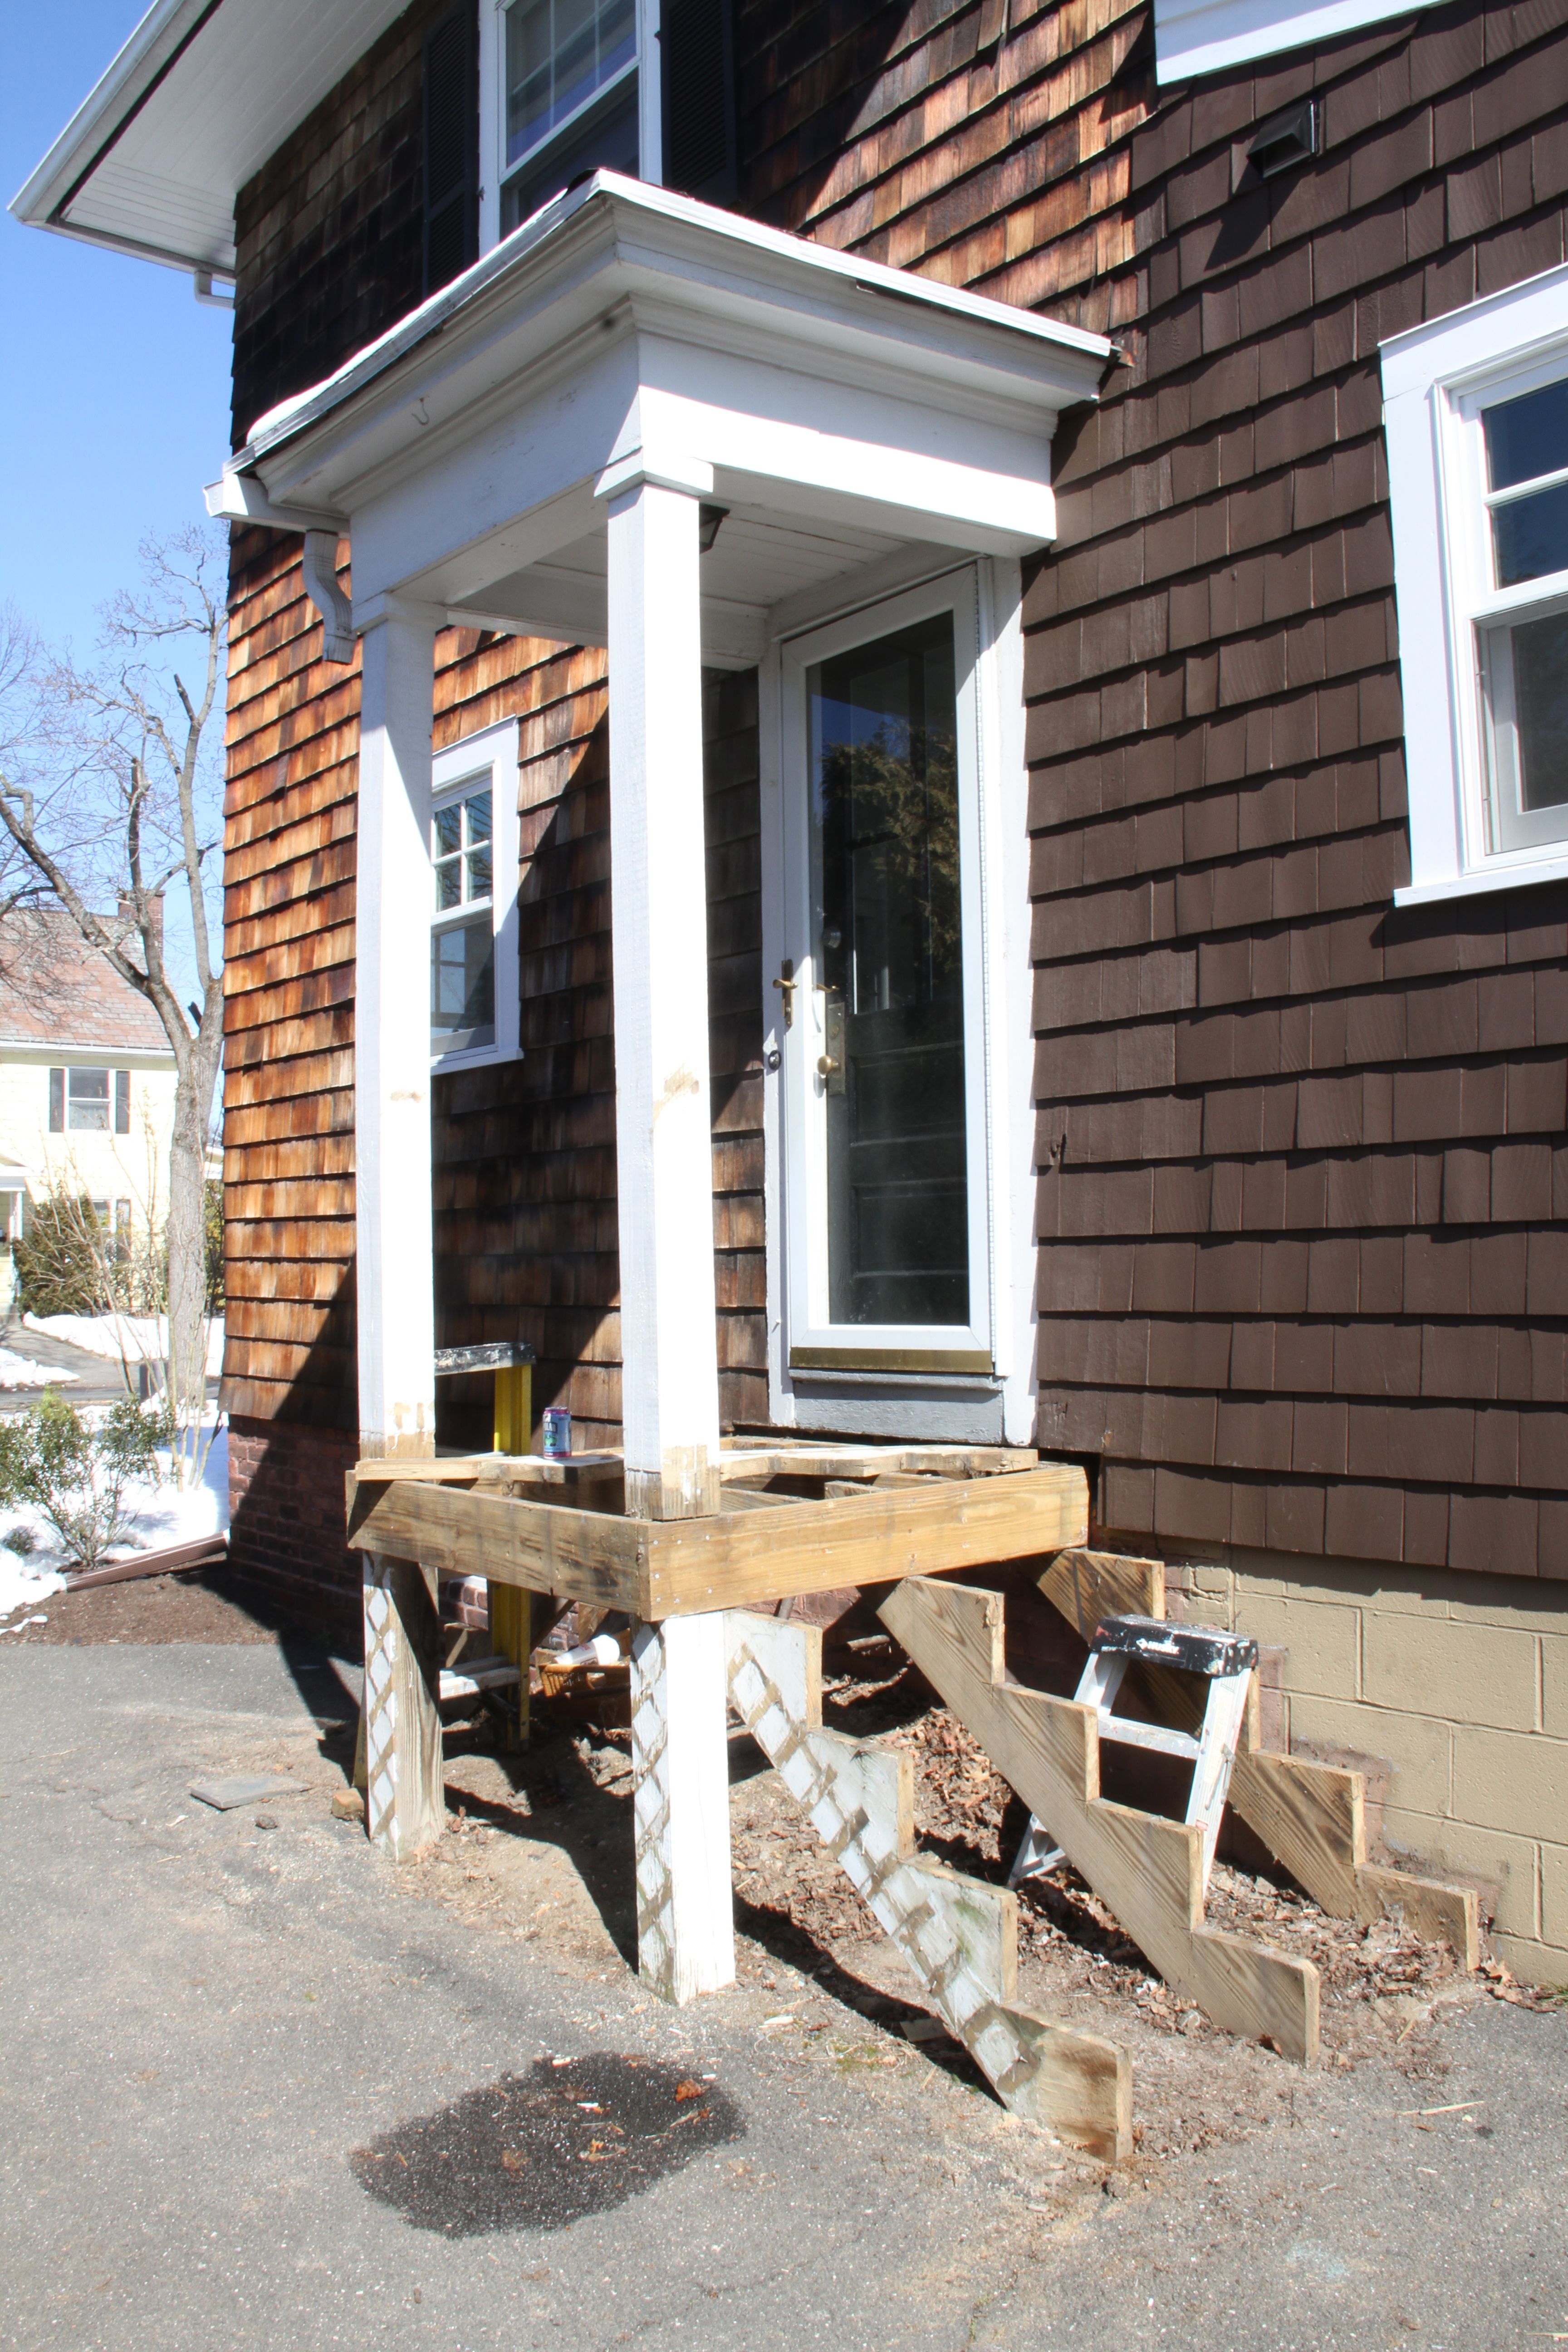 DURING: Our plan is to redo the railings to match the other side of the house, use cedar to wrap all the pressure treated (i.e., ugly) lumber, and to replace the storm door that pretty much failed after our kitchen renovation.